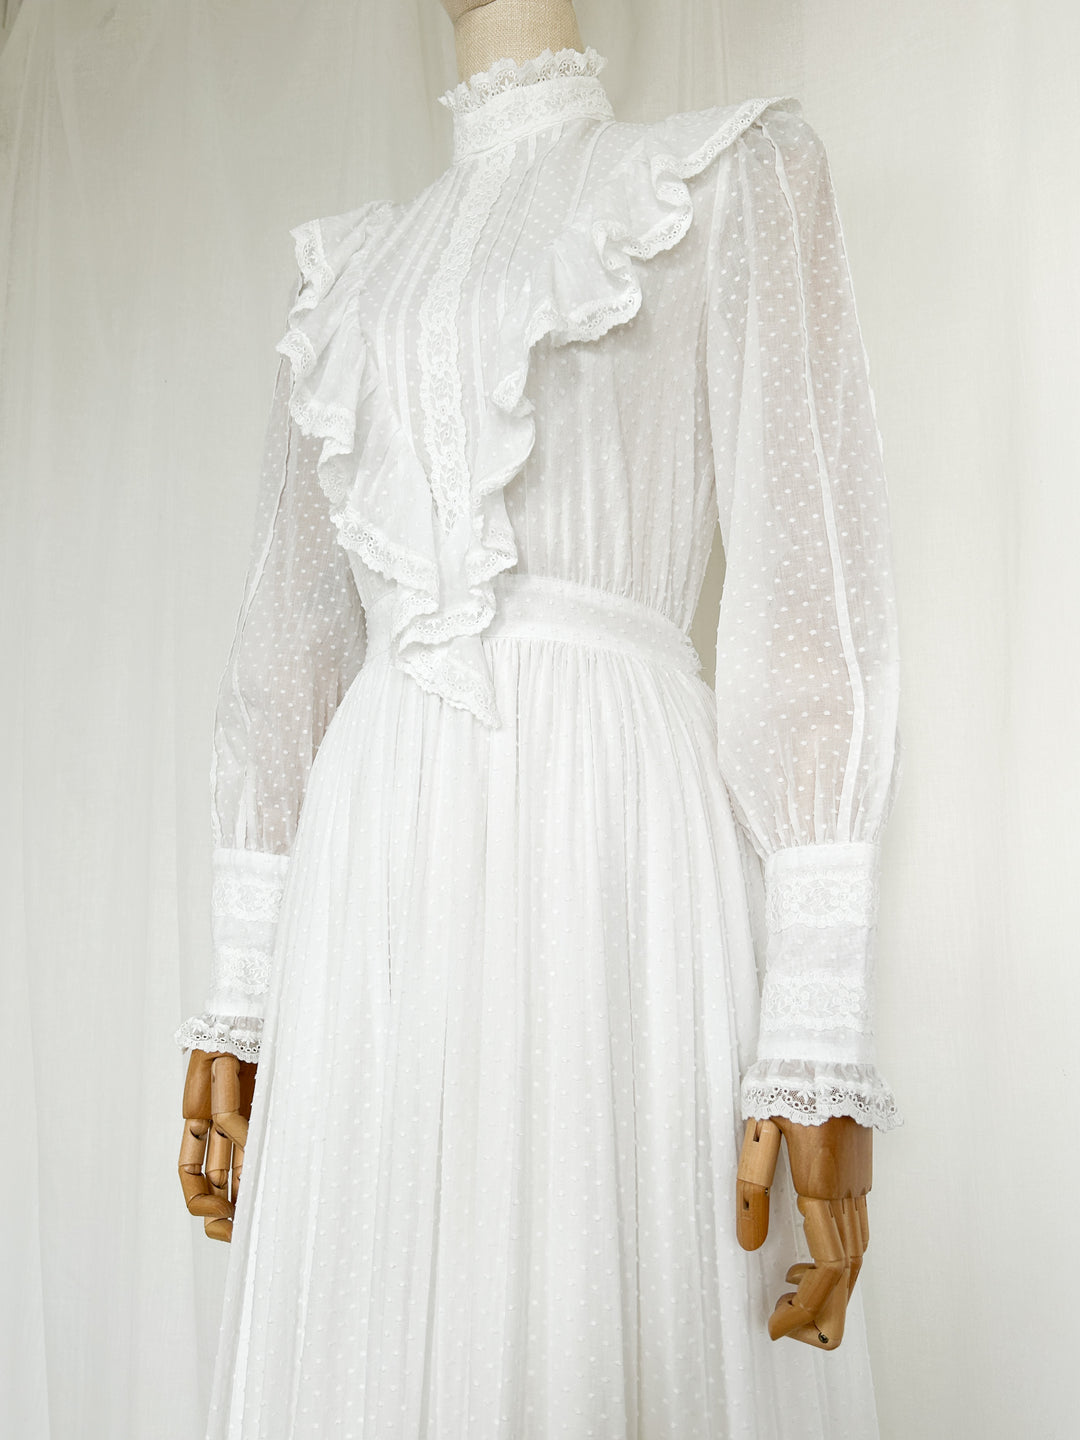 RARE LATE 1970S LAURA ASHLEY COTTON VOILE WEDDING GOWN